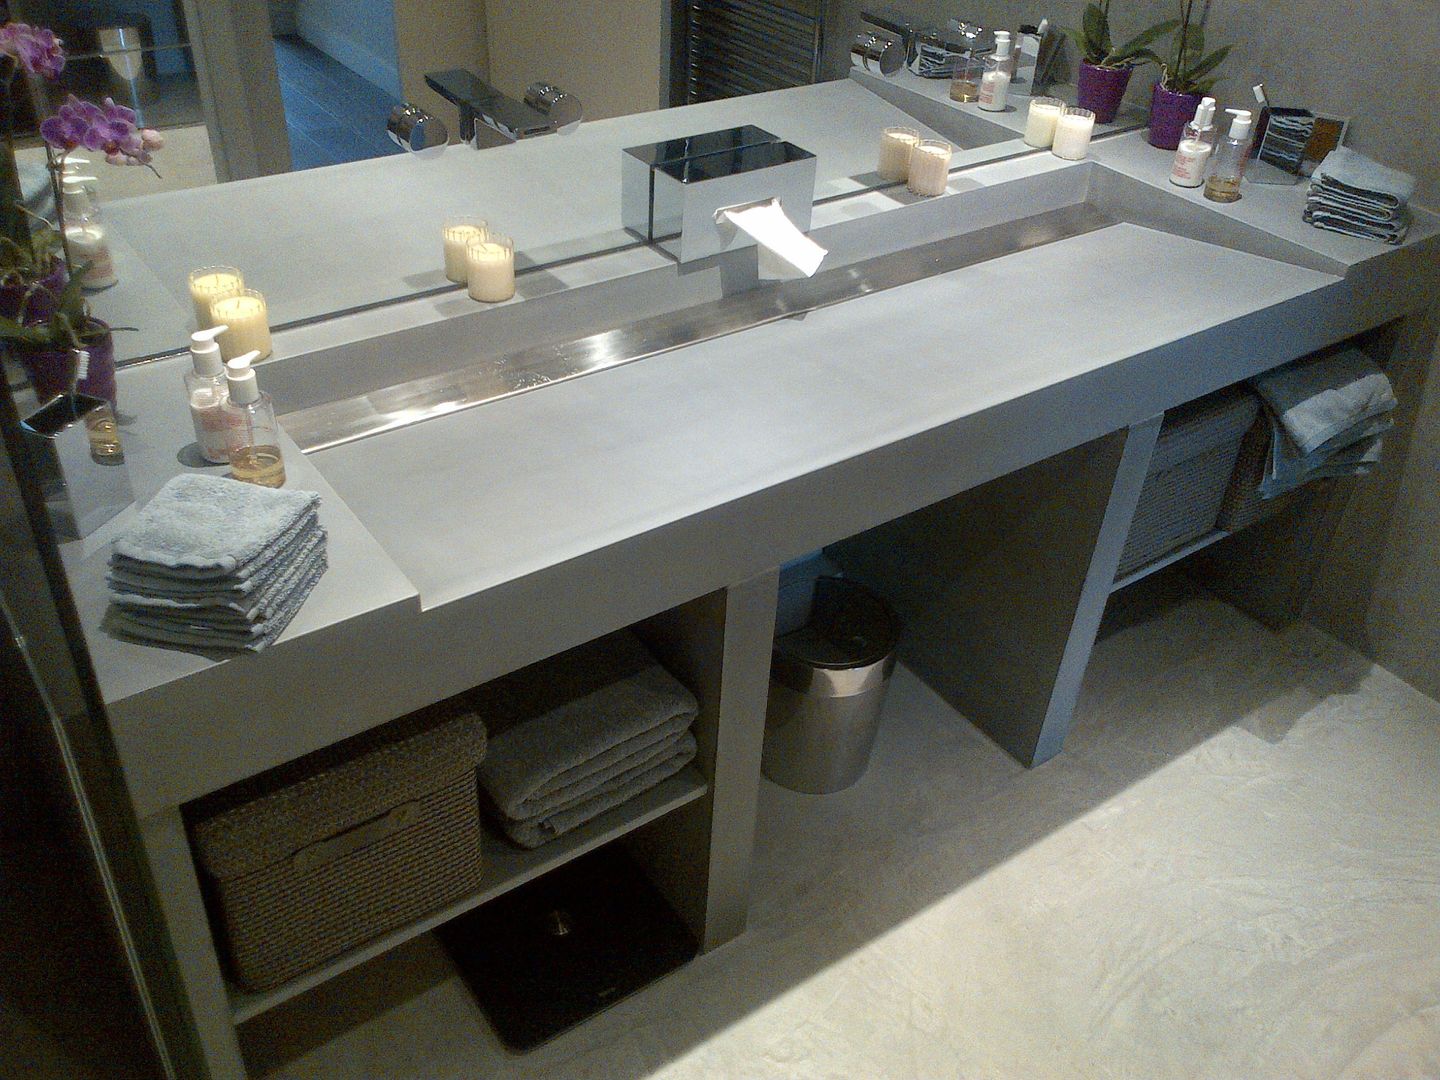 Concrete sinks & Brushed stainless steel Concrete LCDA 모던스타일 욕실 concrete sink,concrete bathroom,bespoke sink,bespoke bathroom